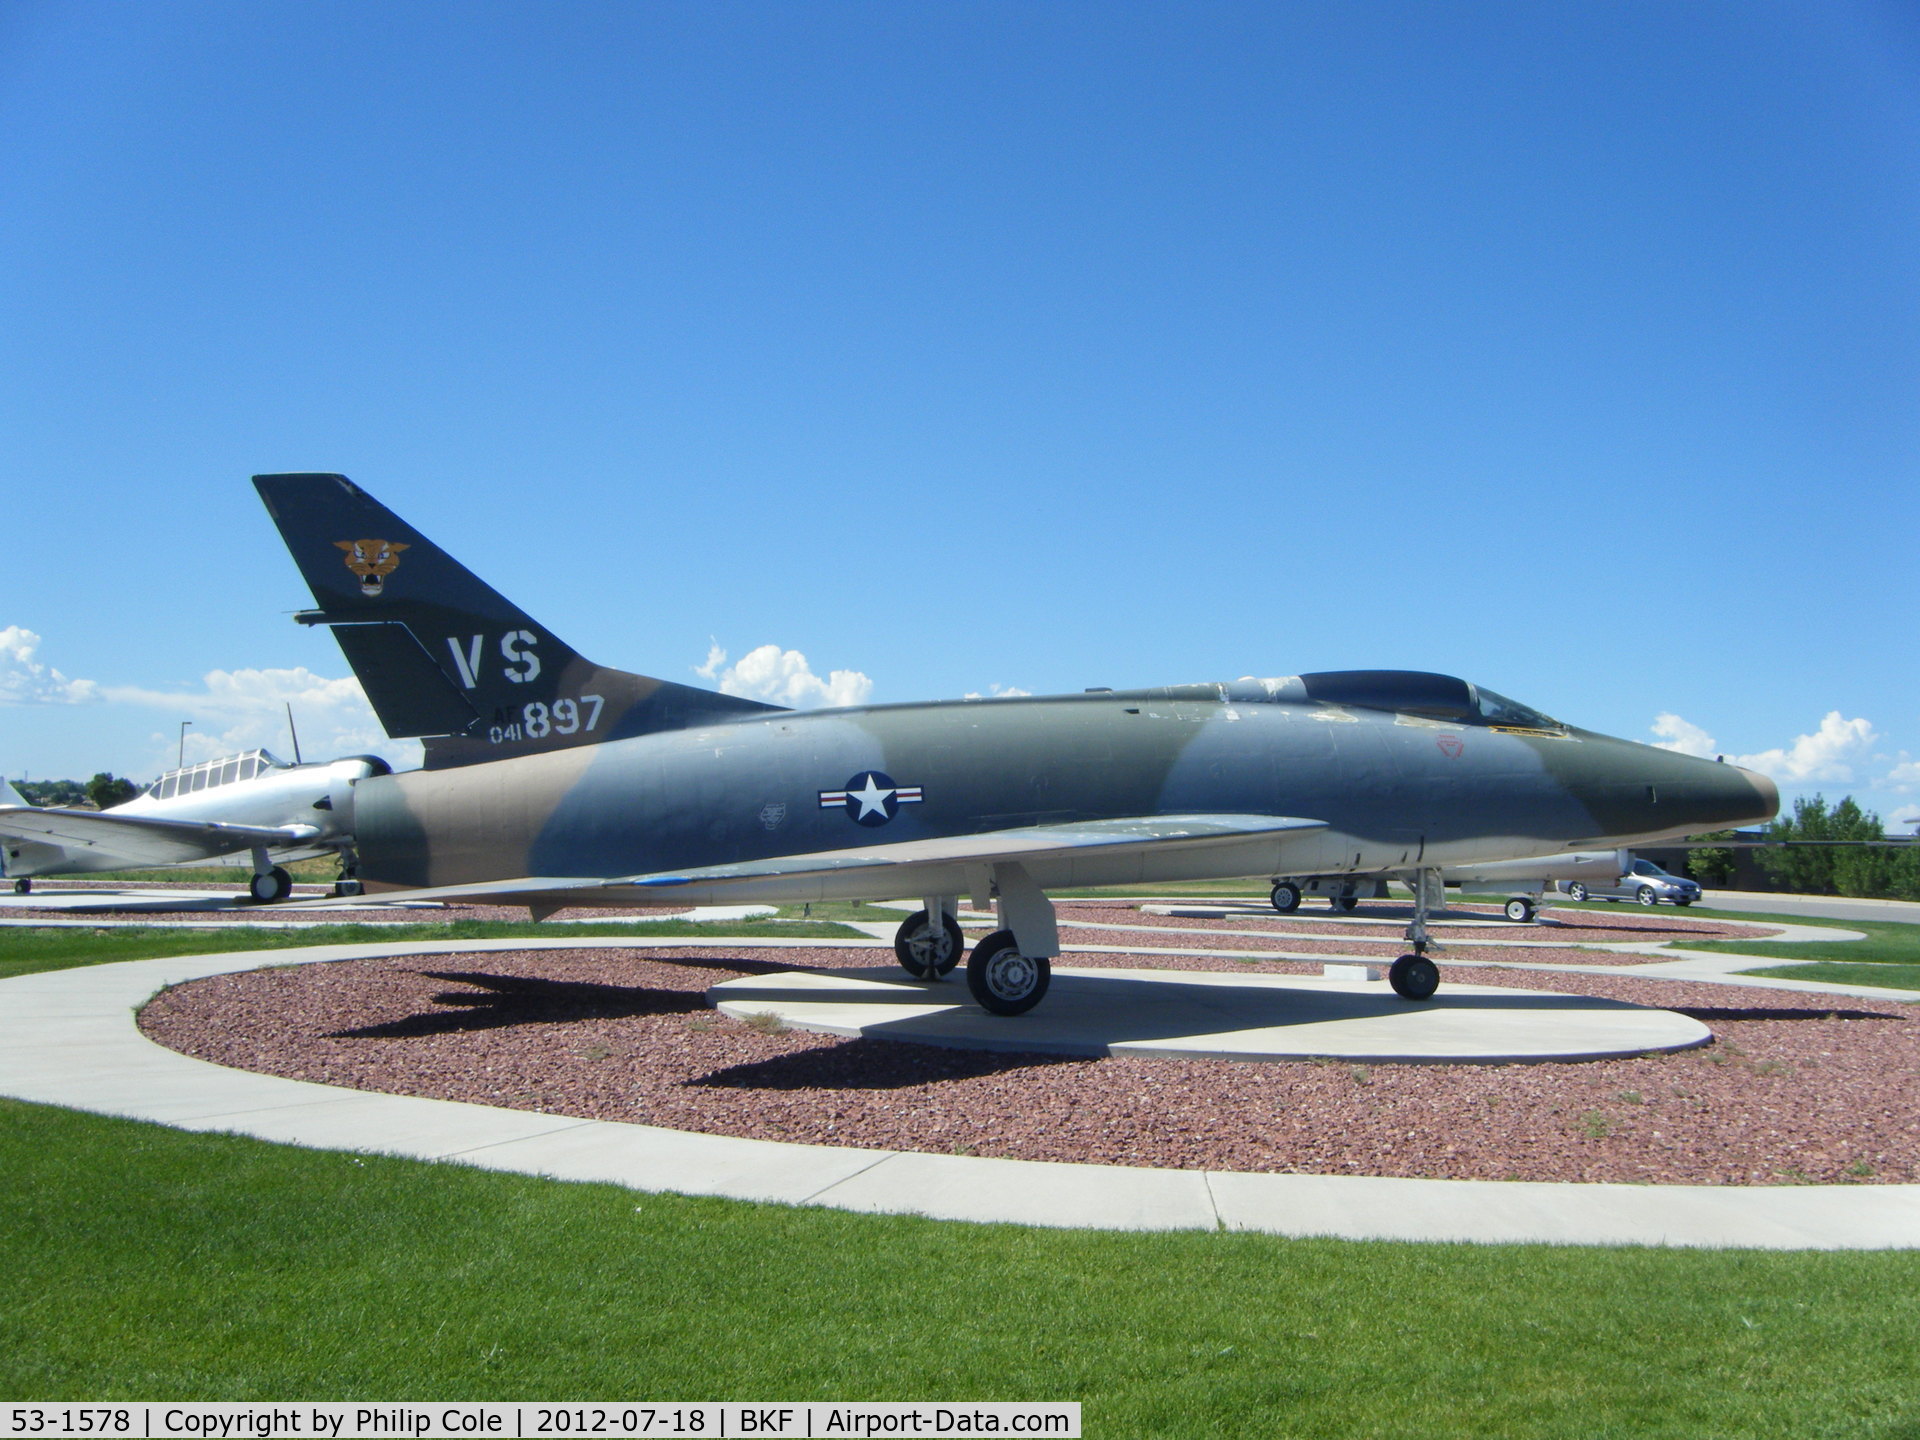 53-1578, 1953 North American F-100A Super Sabre C/N 192-73, Preserved Outside the 140 WG HQ Building